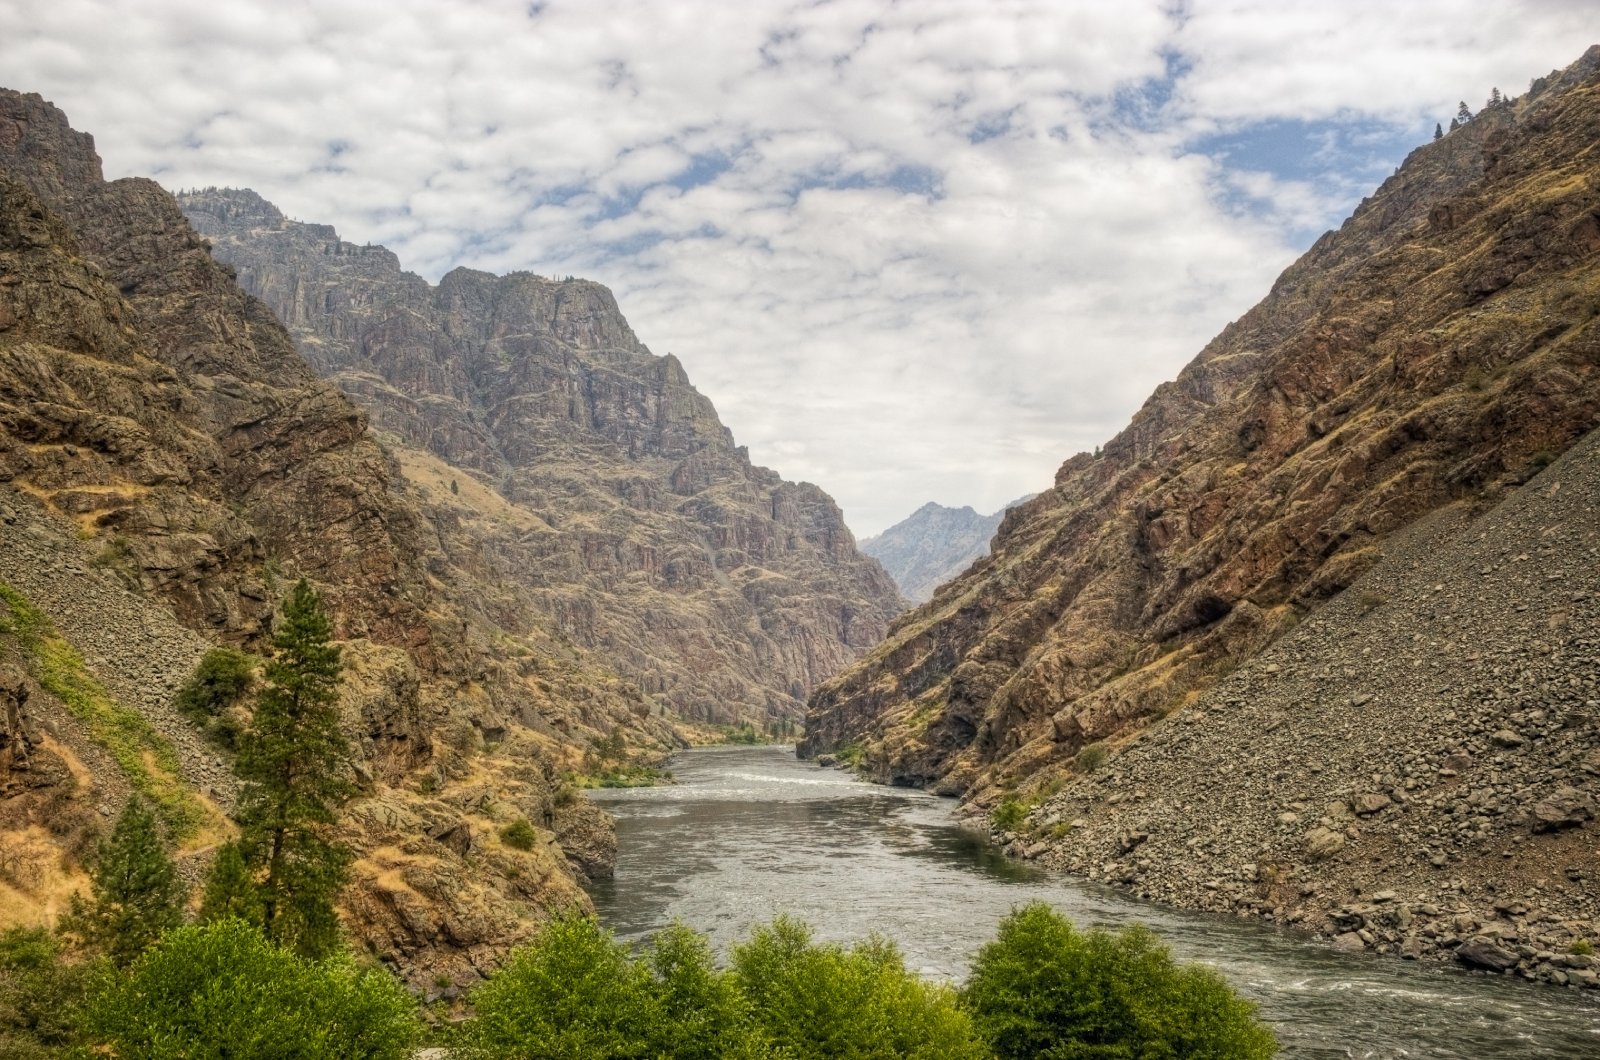 <p class="wp-caption-text">Image Credit: Shutterstock / Jeffrey T. Kreulen</p>  <p>Adventure in North America’s deepest river gorge. Jet boat tours can be pricey, but the unparalleled views and potential bighorn sheep sightings offer rich rewards for the investment.</p>